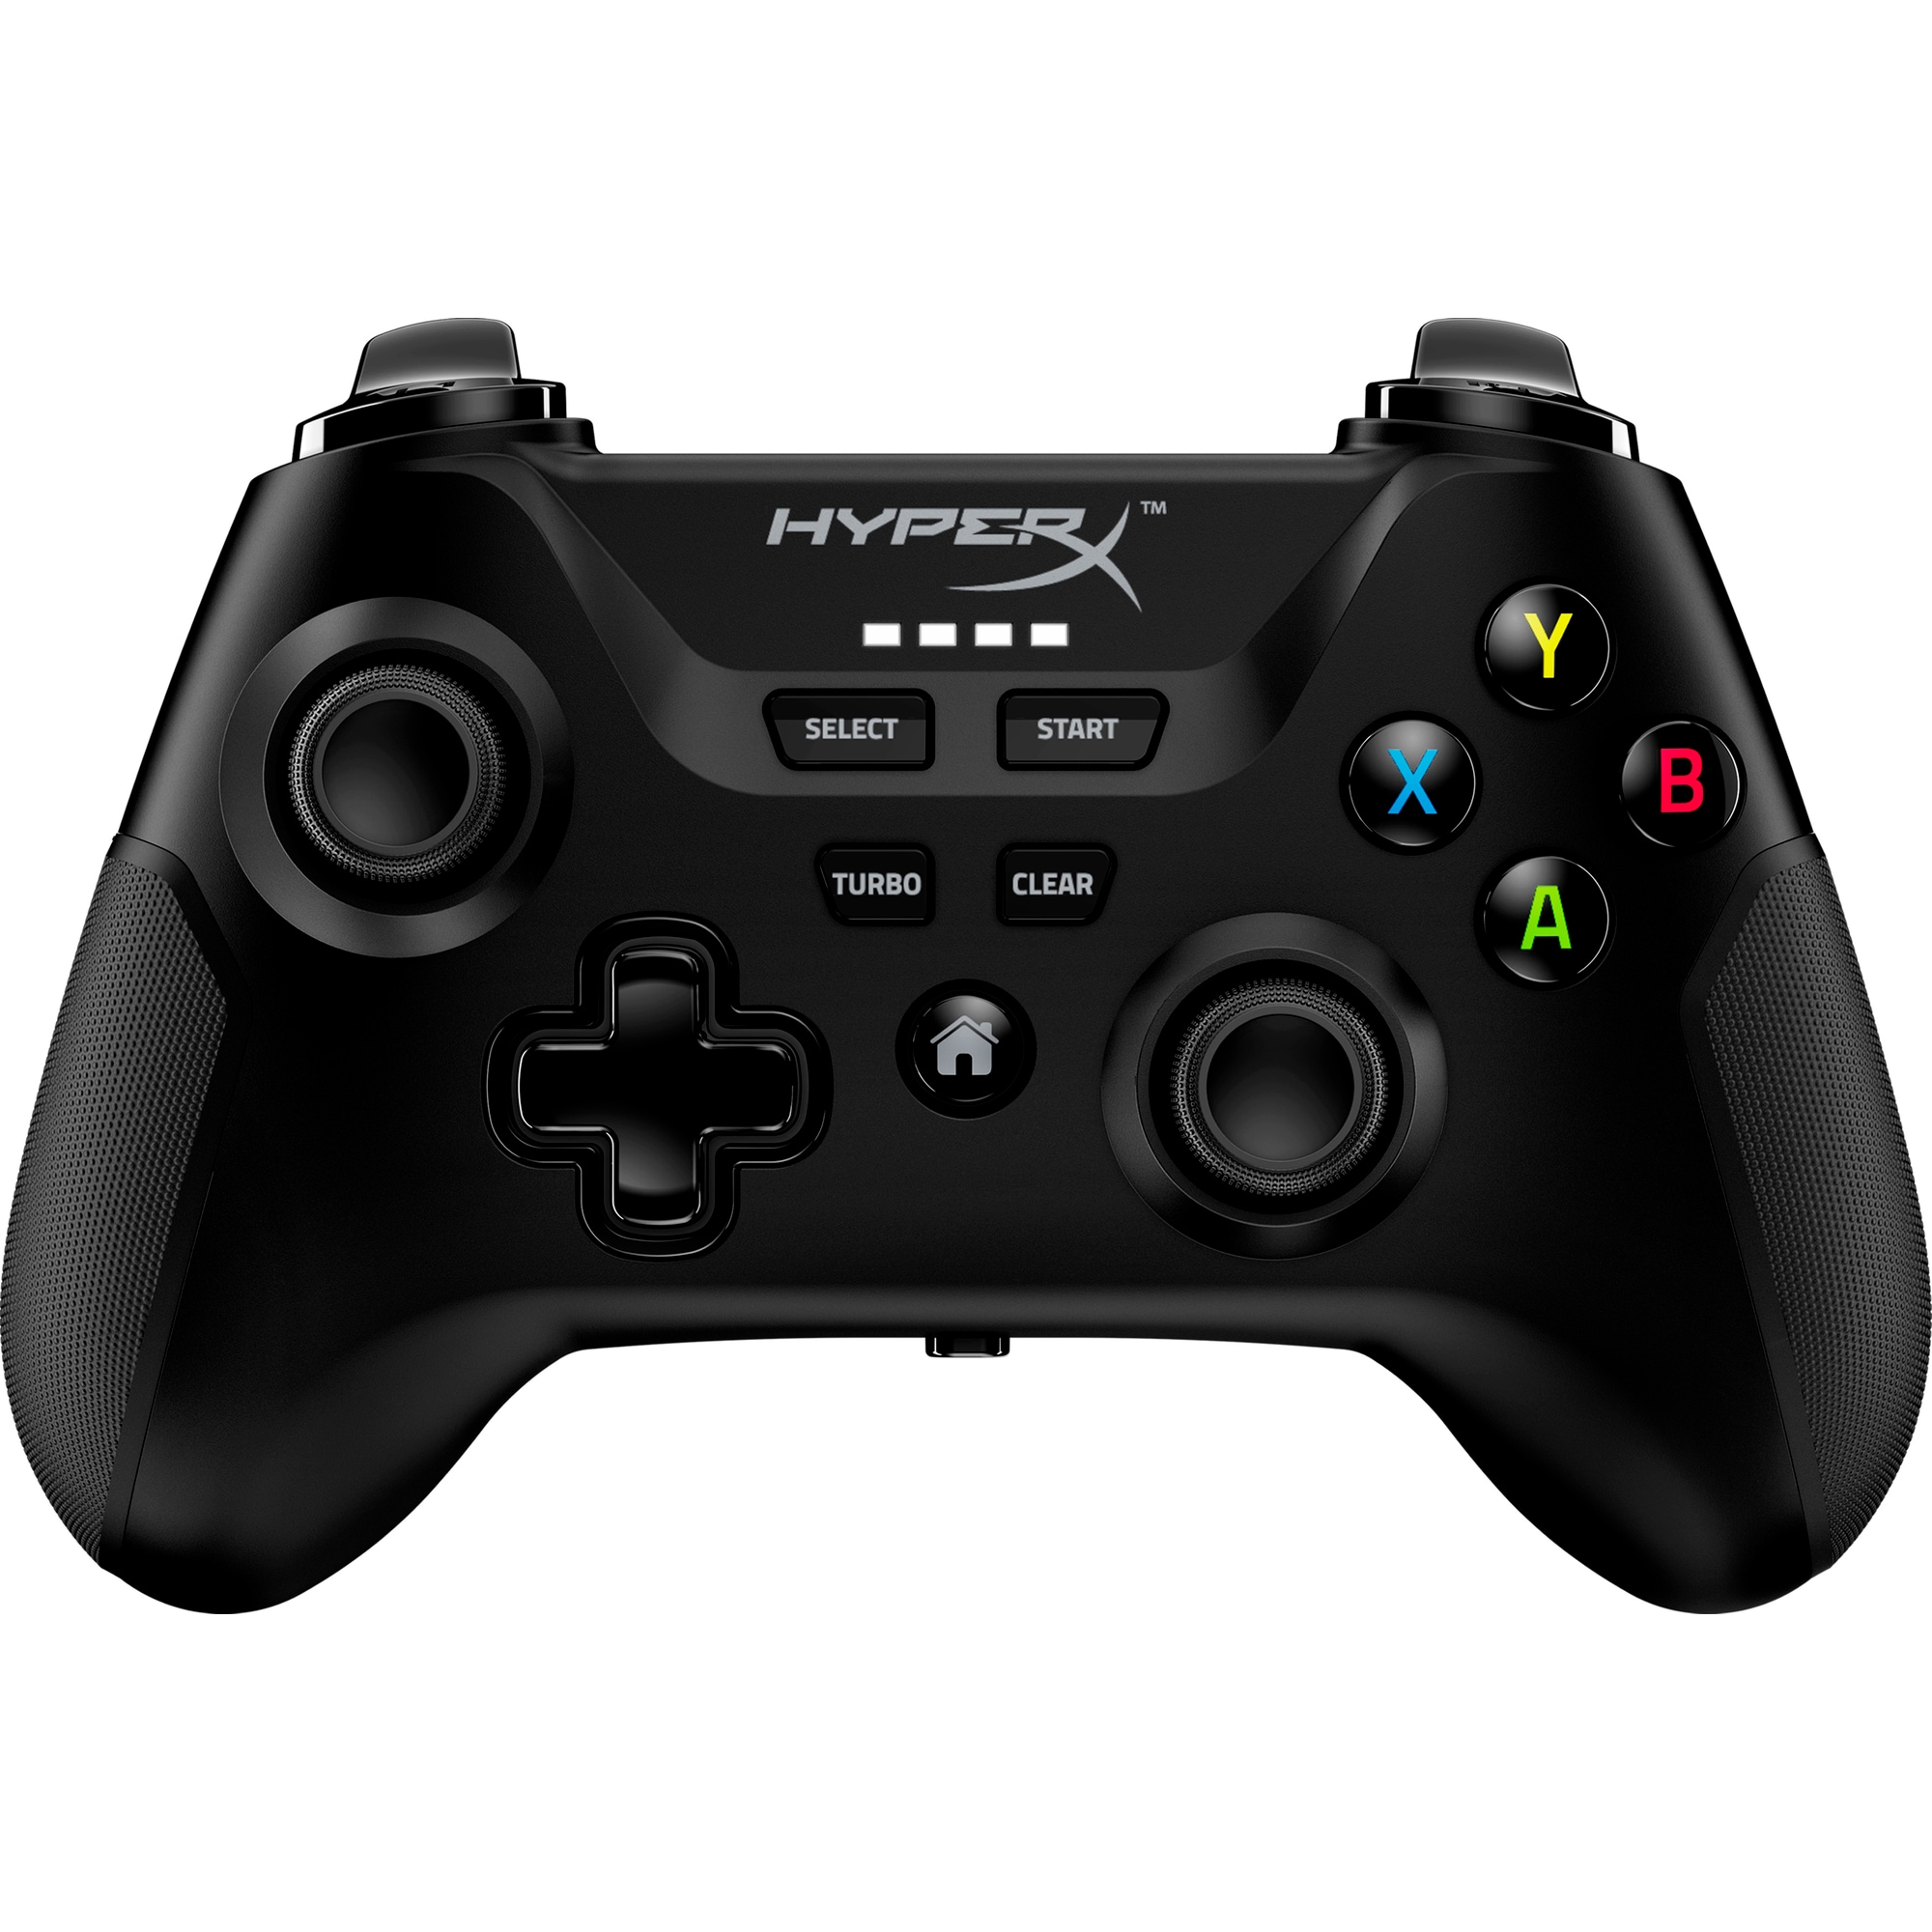 HyperX Clutch - Wireless Gaming Controller (Black) - Mobile-PC (HCRC1-D-BK G) - Mobile Accessories4 